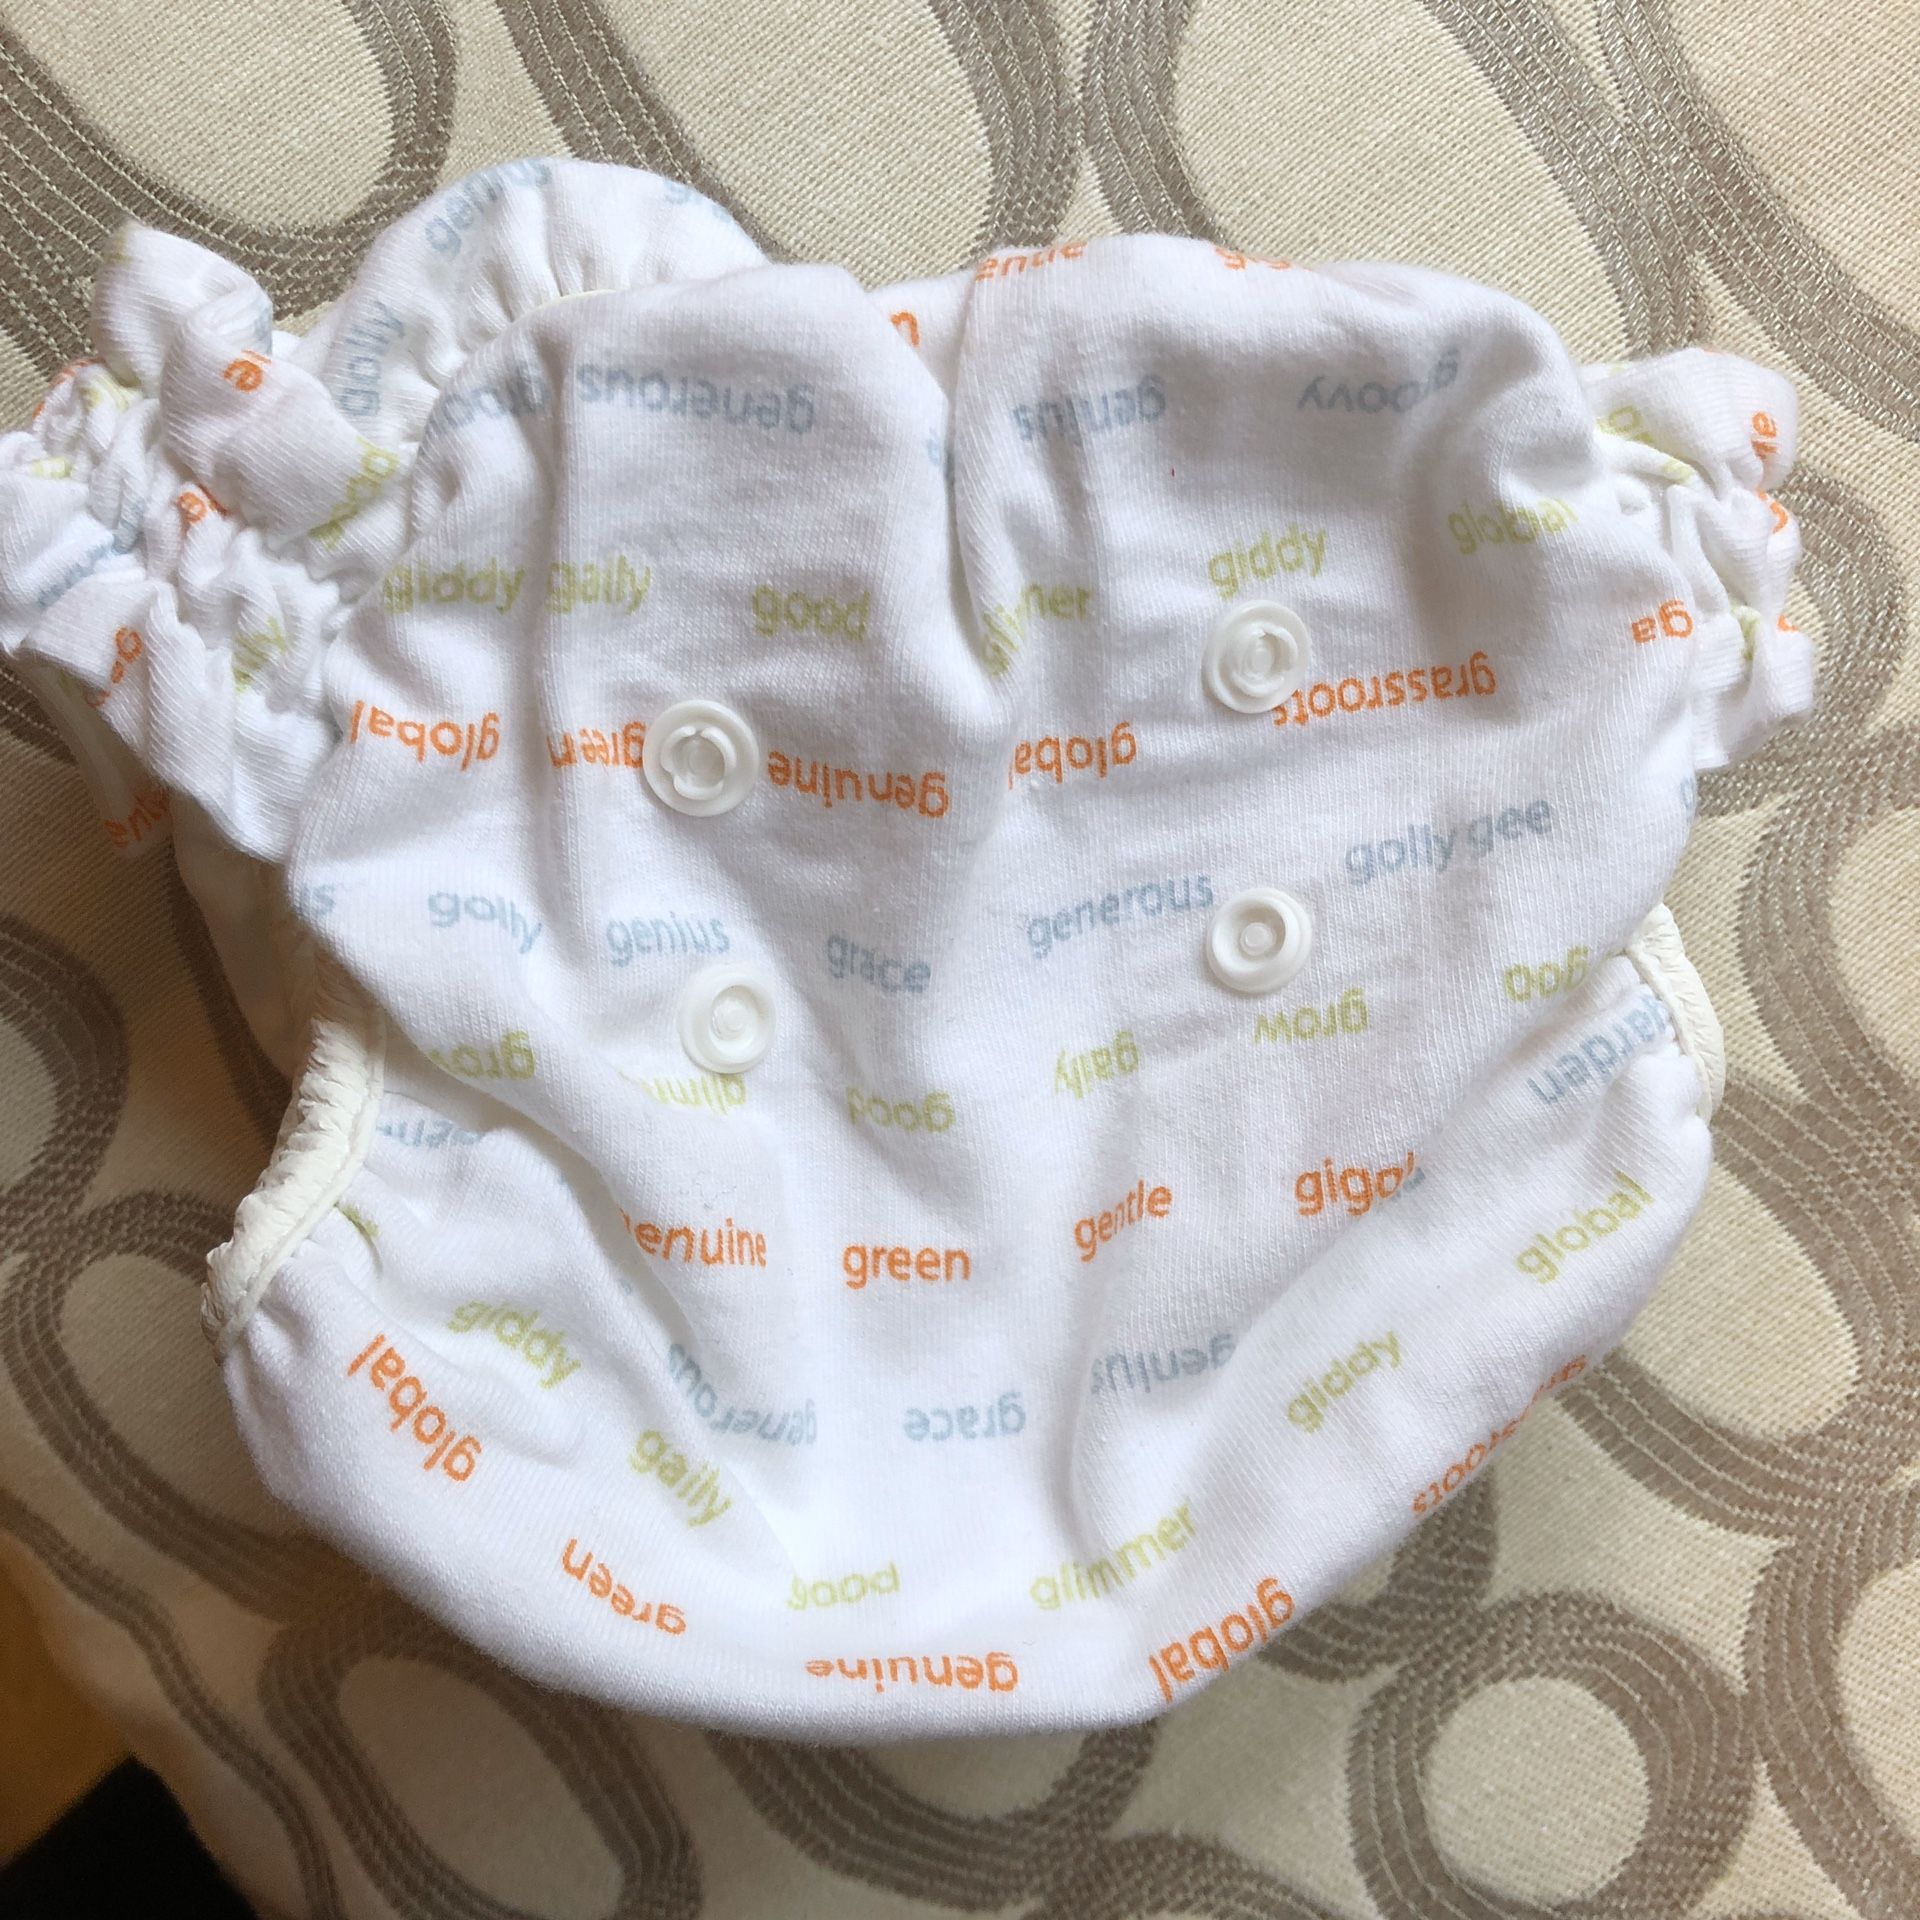 7 Newborn G Diapers/G Pants Cloth Diapers